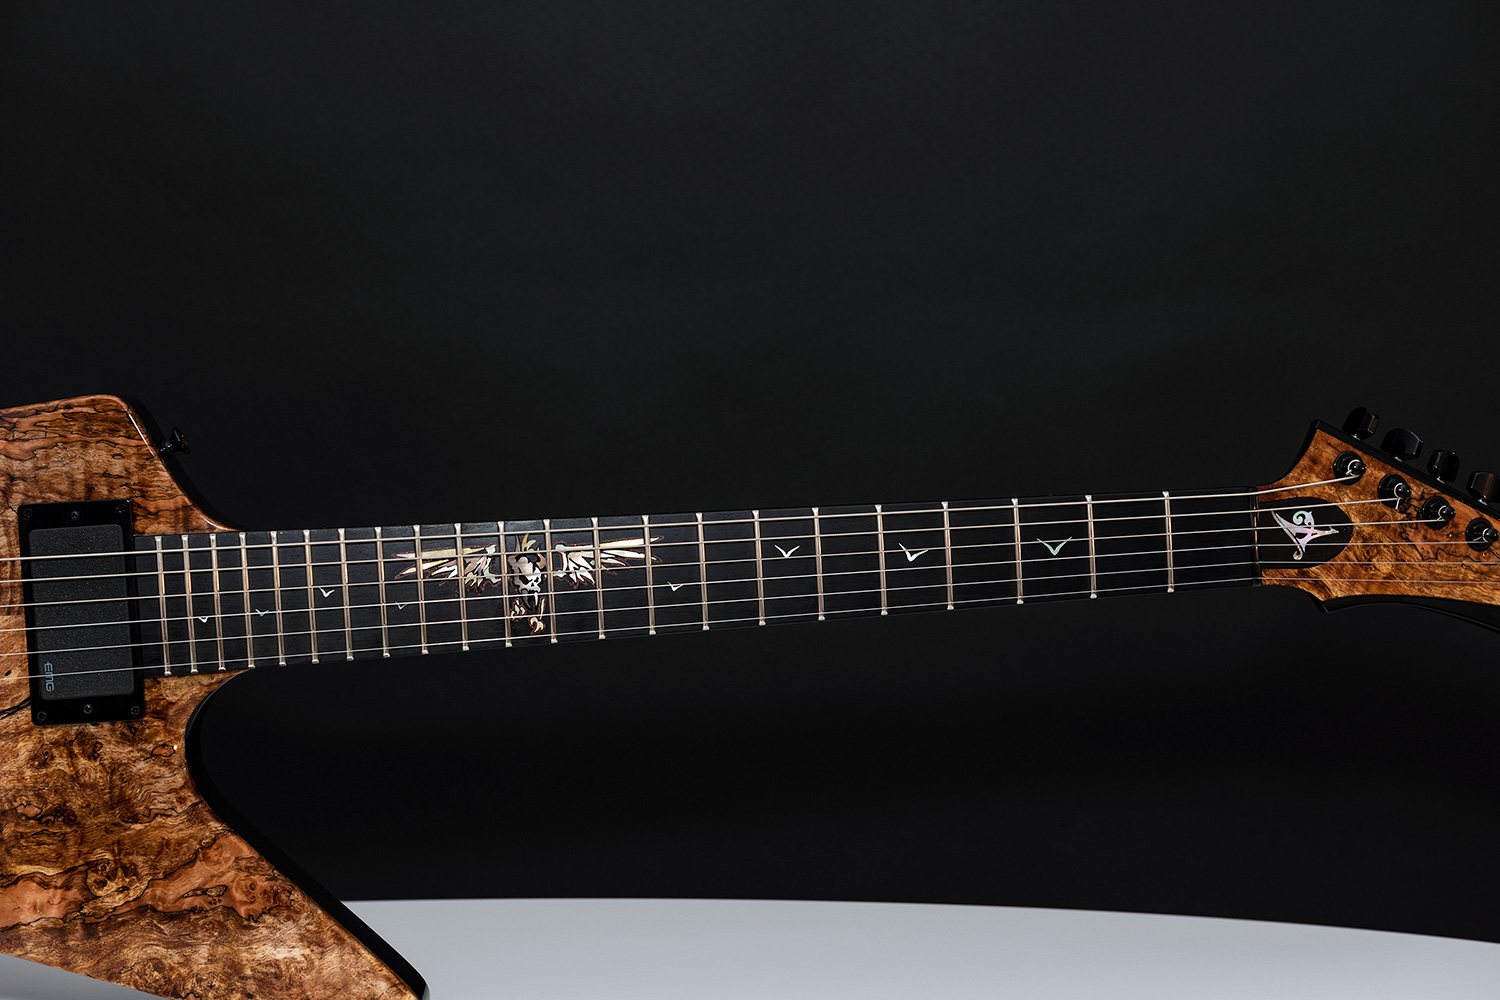 This guitar is called Vulturus and is a tribute to Metallica band Augustin is a luthier with over 15 years of experience, specializing in custom guitars